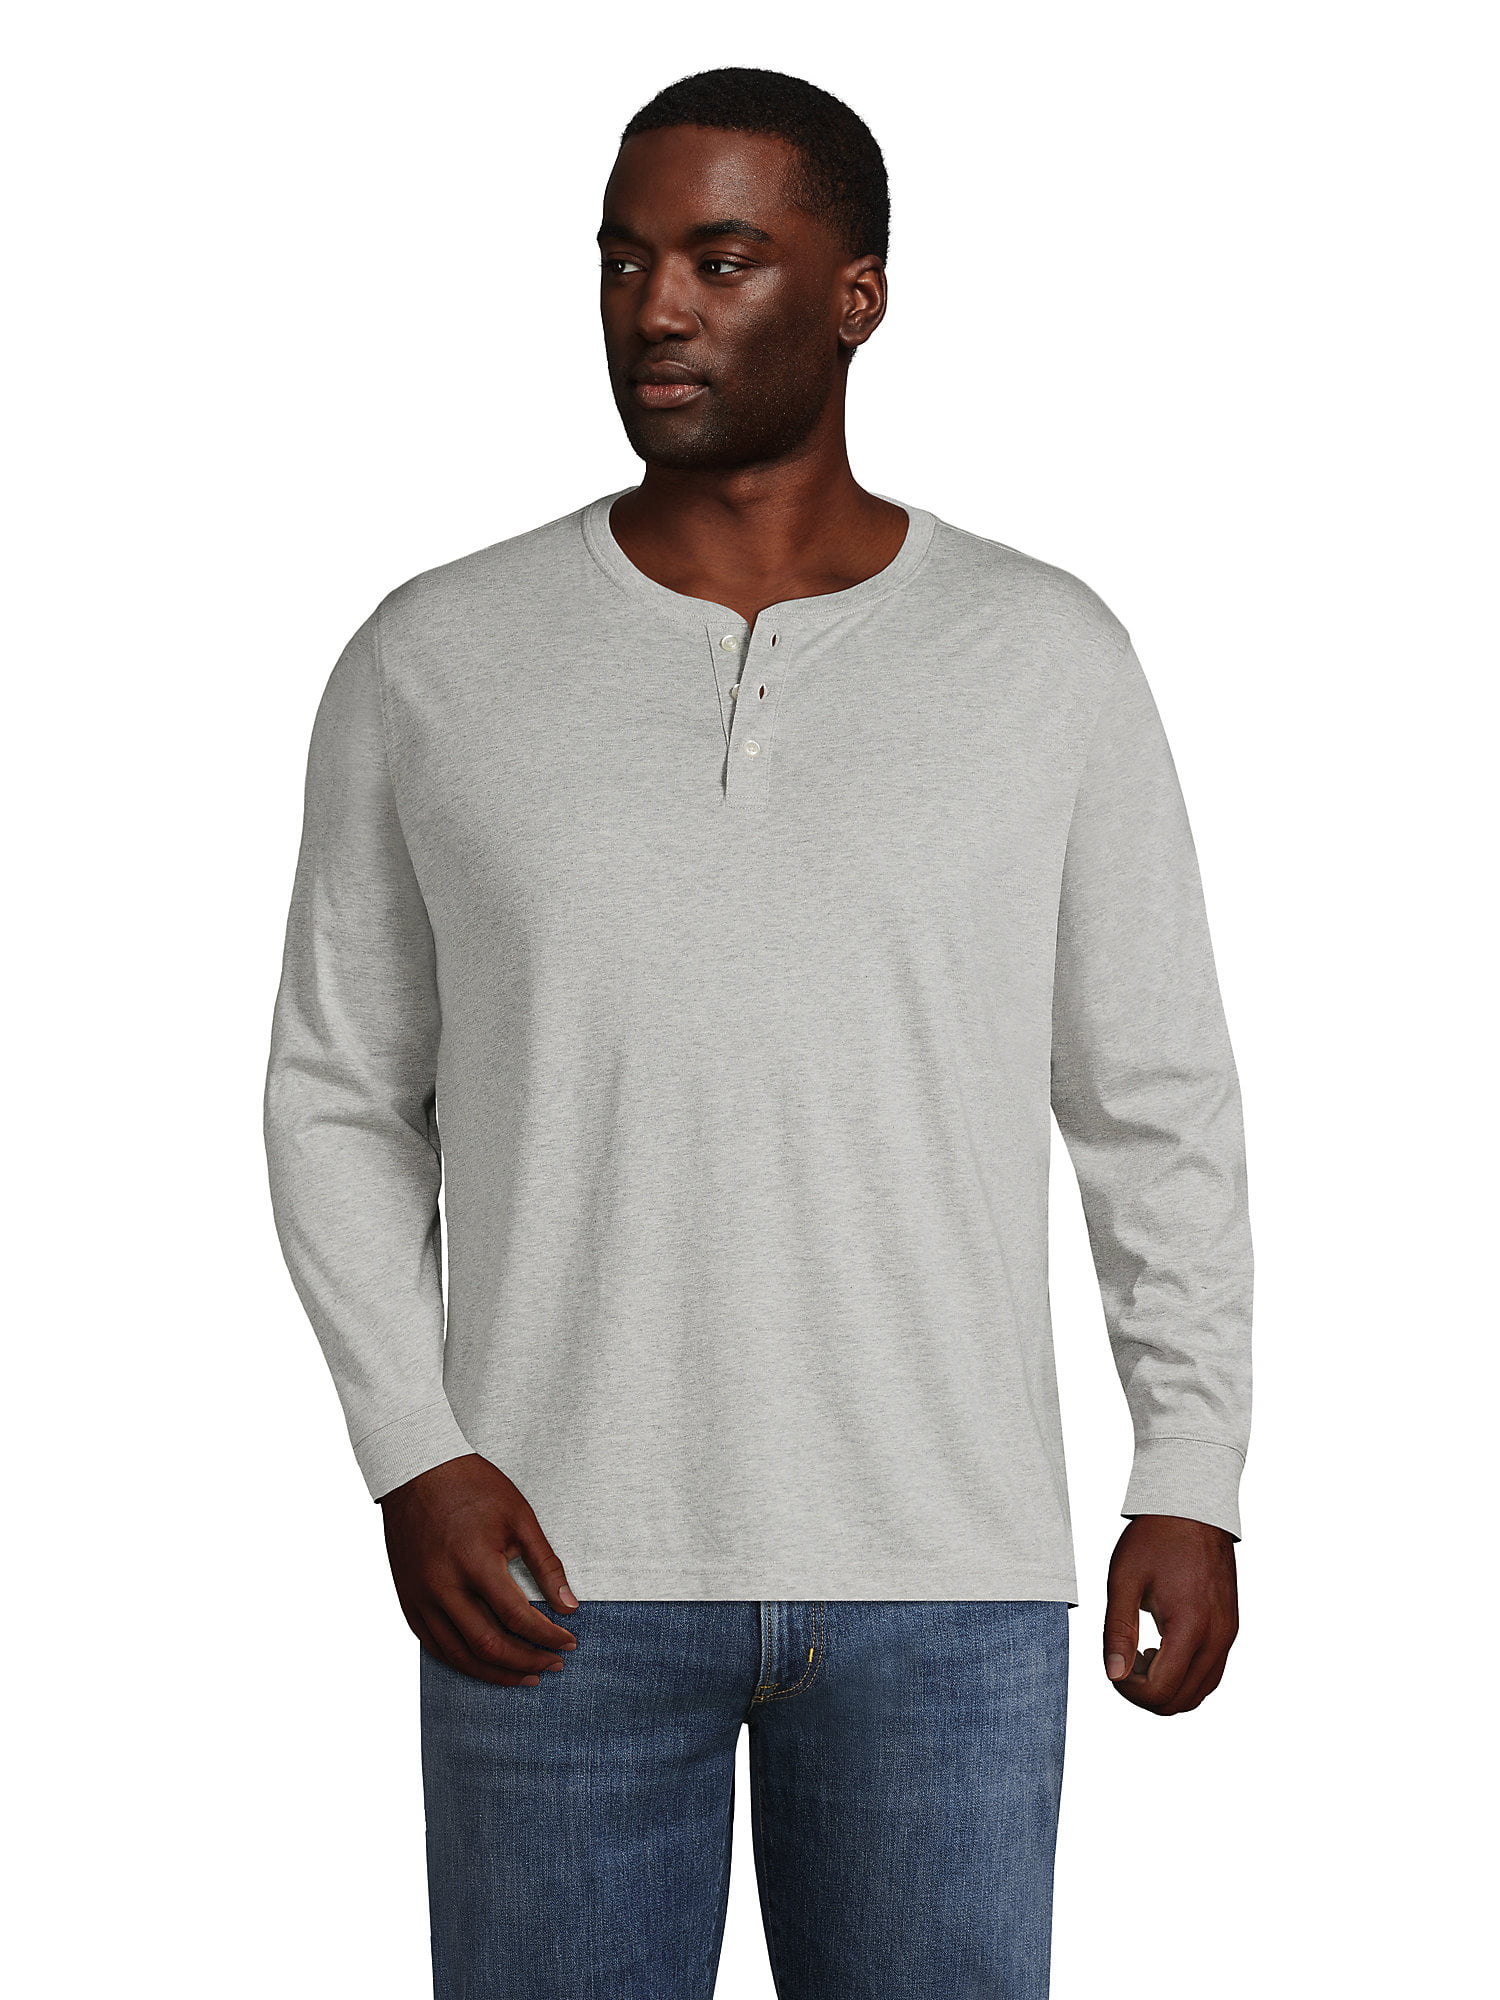 white extra-long sleeves Ultra t-shirt